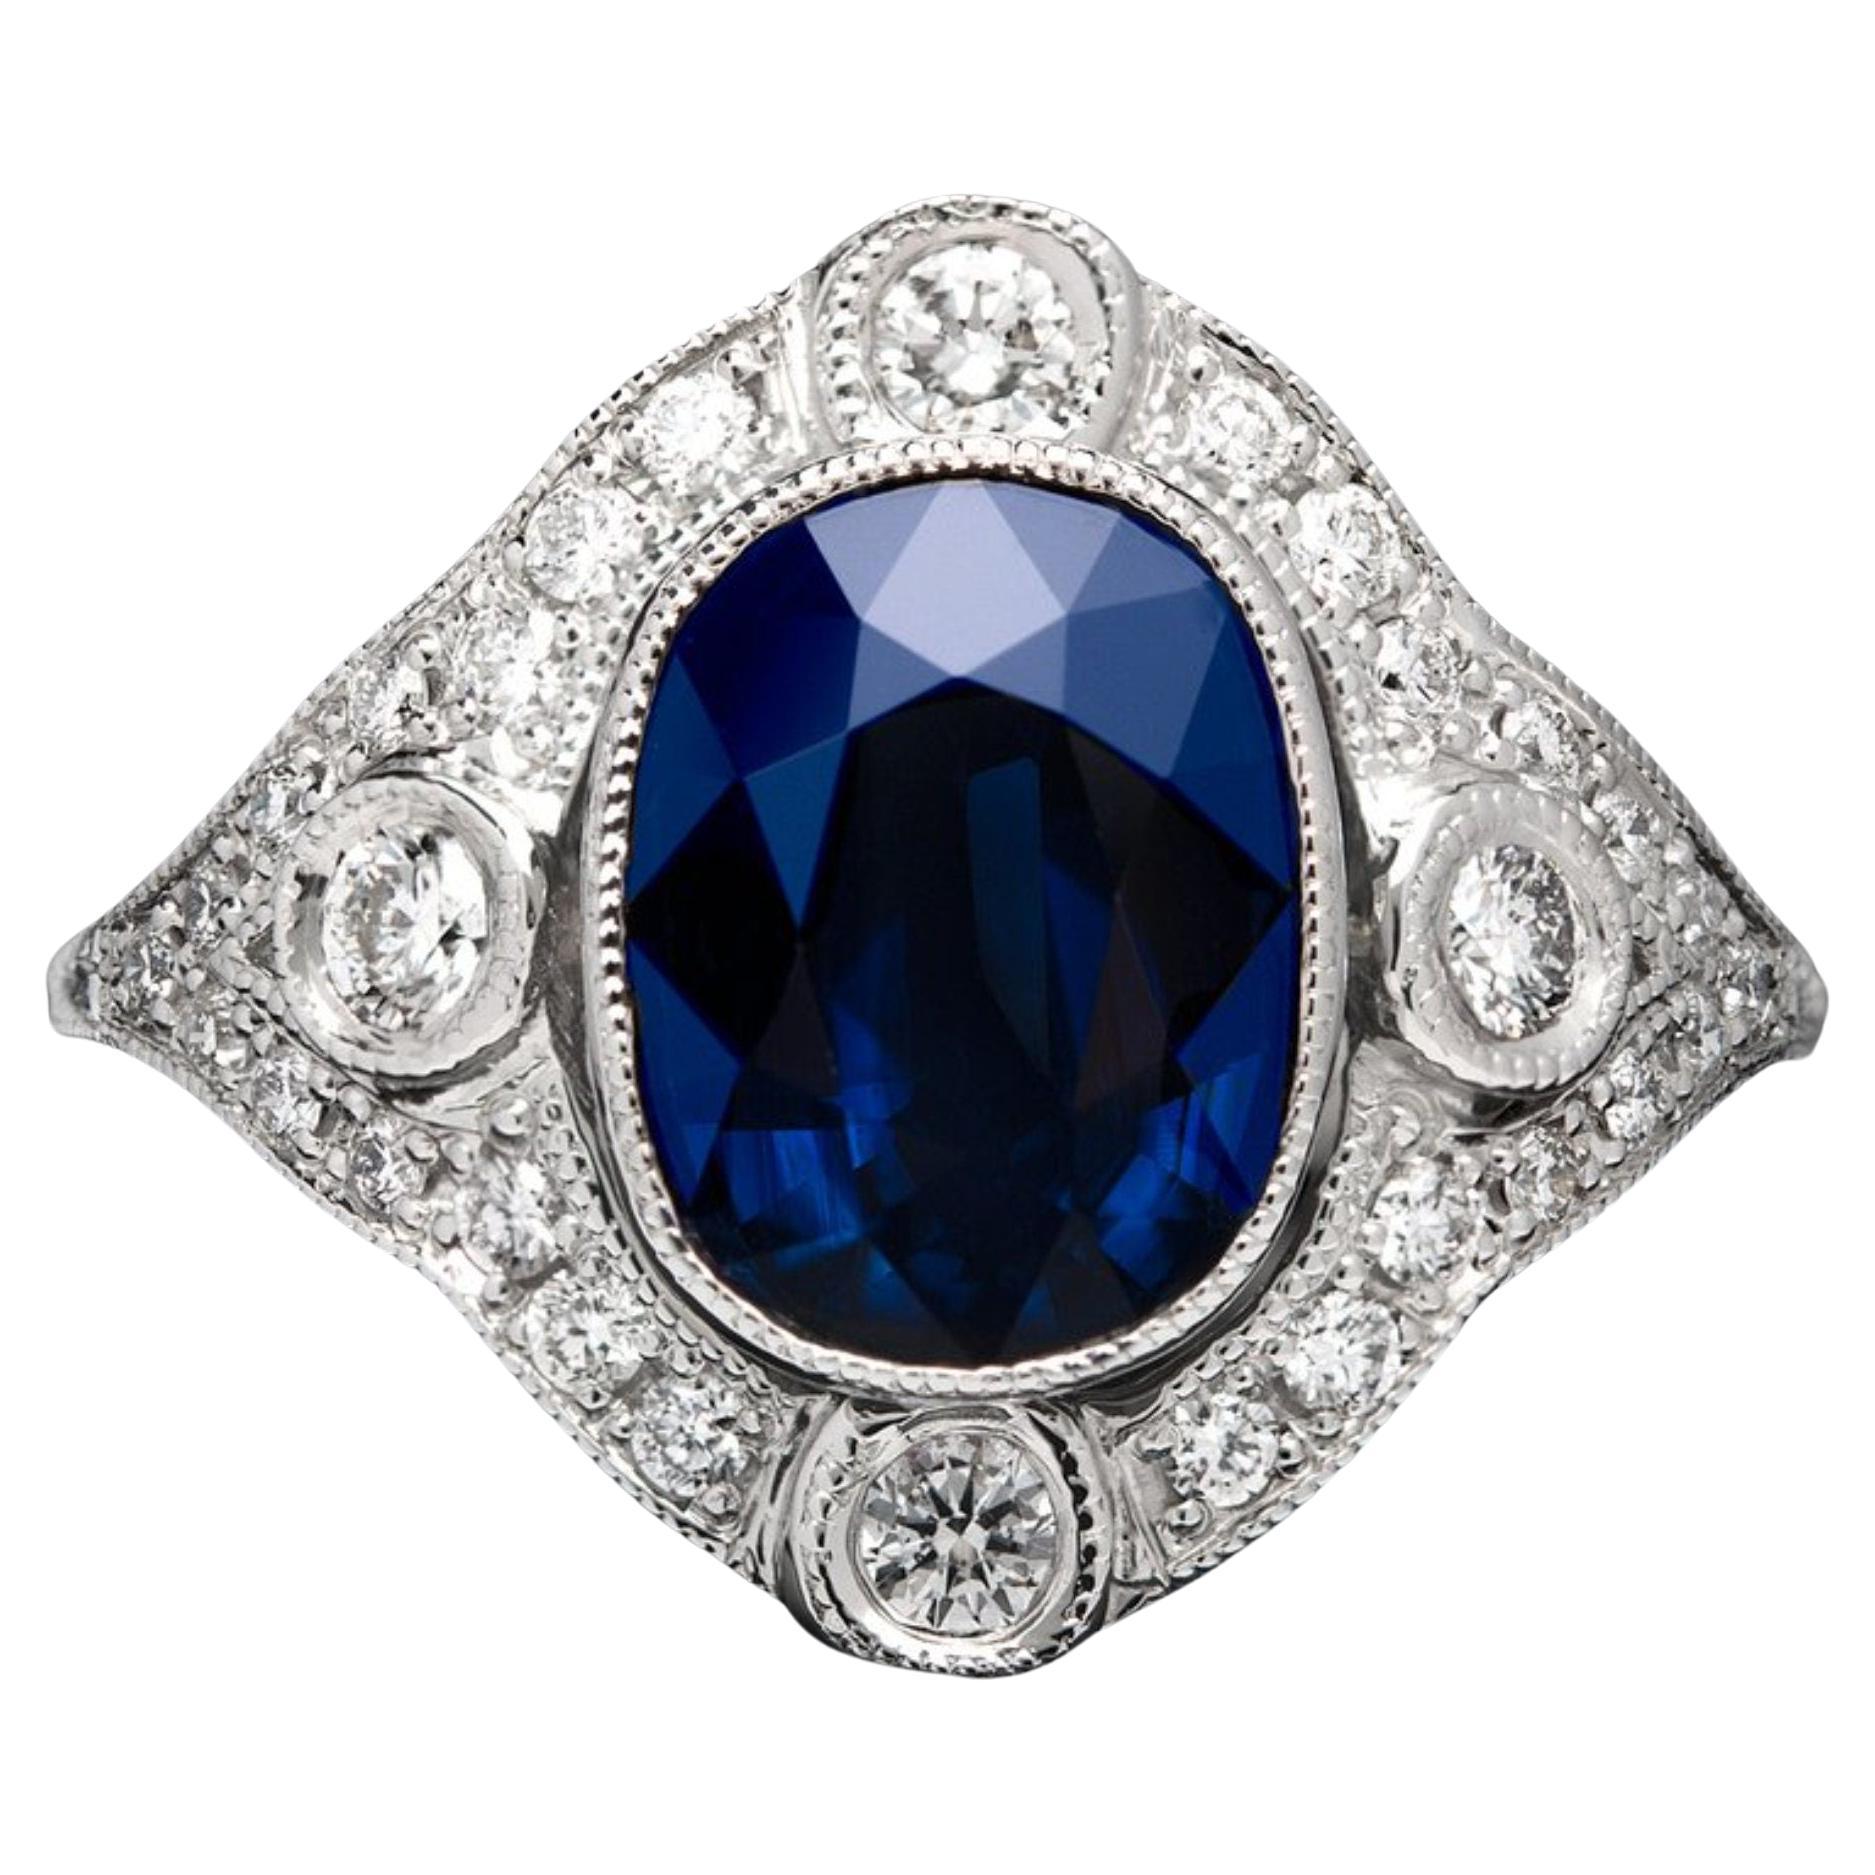 For Sale:  4 Carat Oval Cut Sapphire Diamond Engagement Ring, Blue Sapphire Wedding Ring